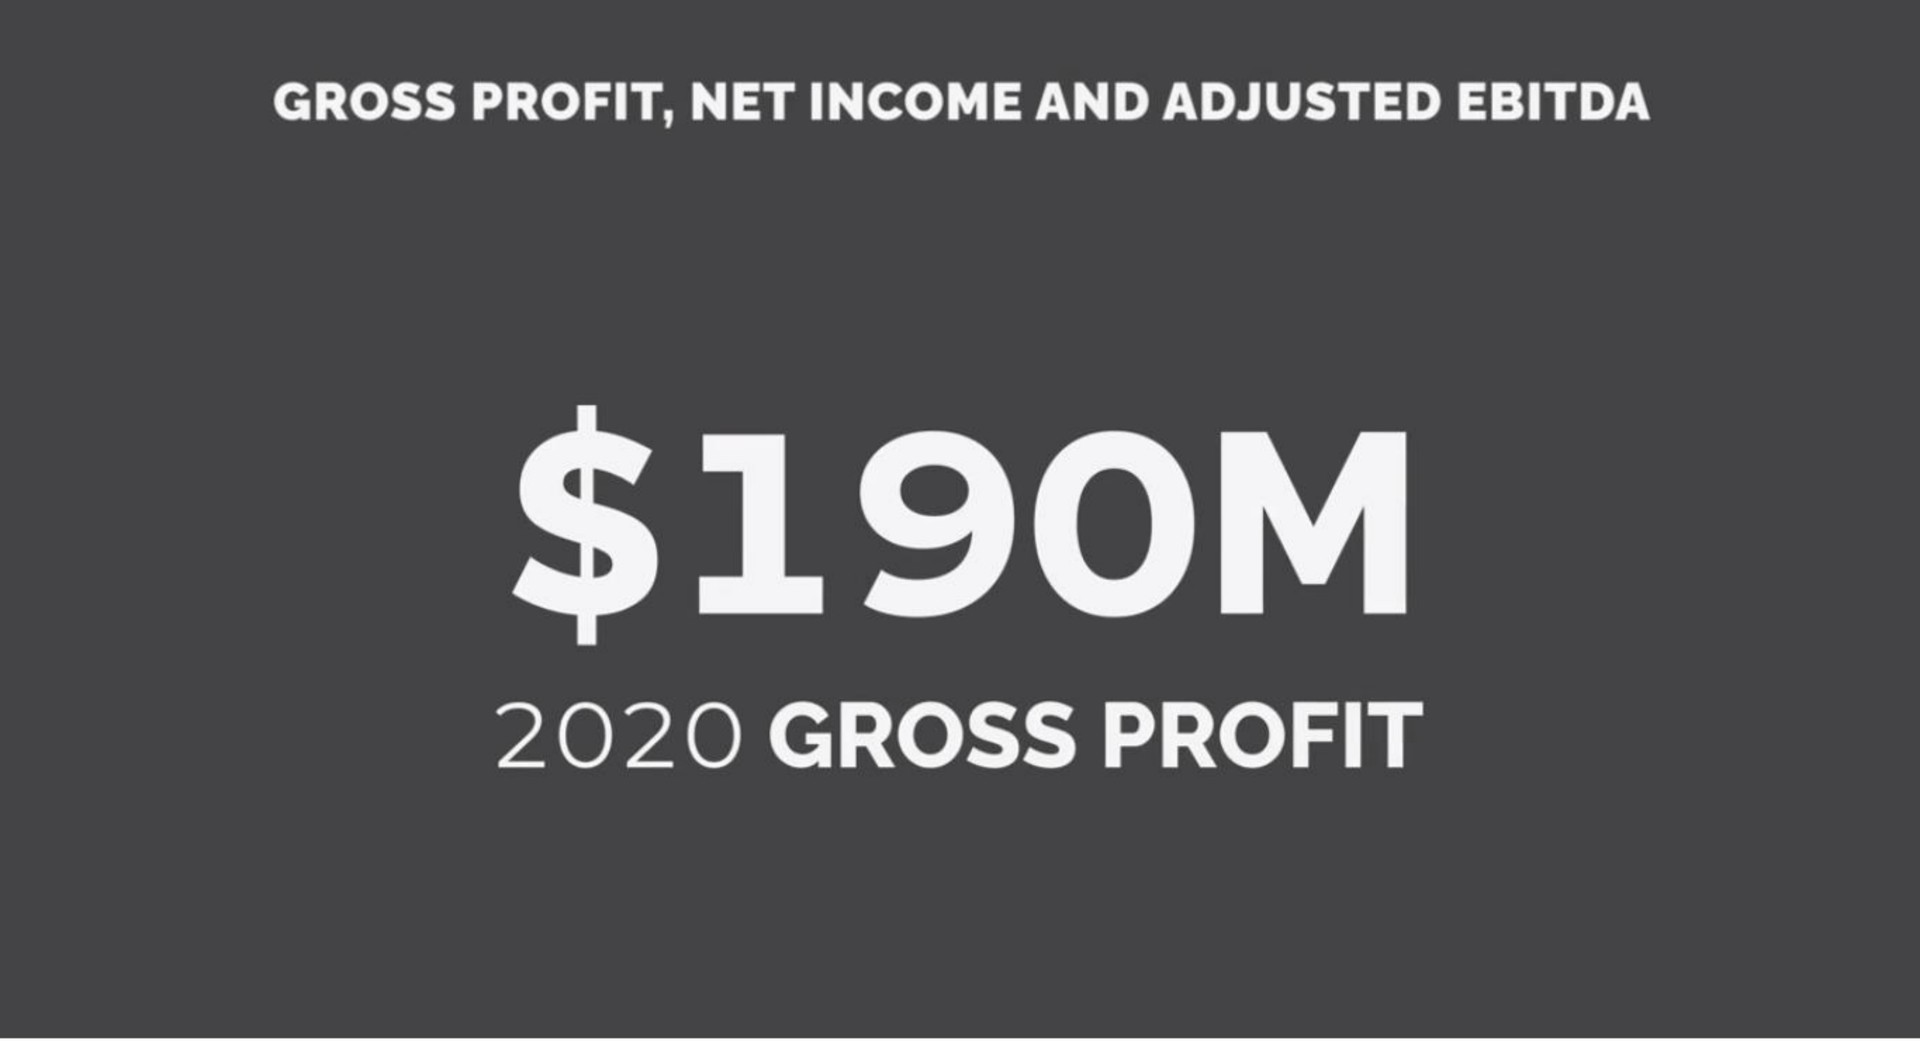 gross profit net income and adjusted gross profit | FIGS